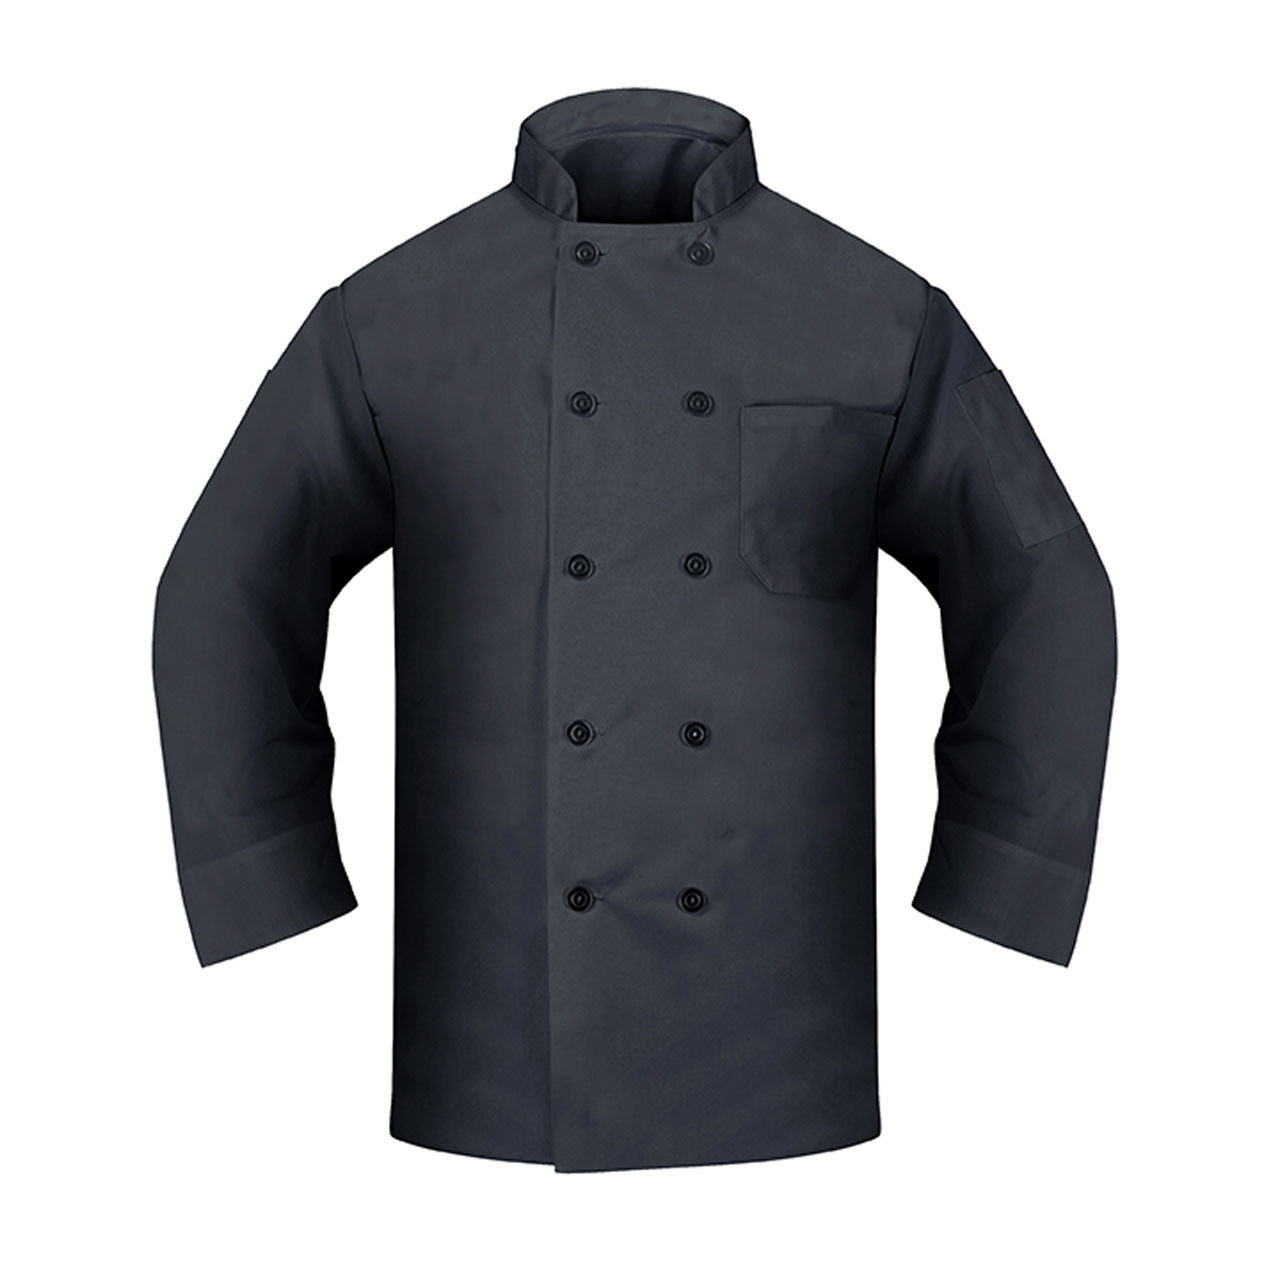 Before buying, can you tell me the material of these black chef coats?